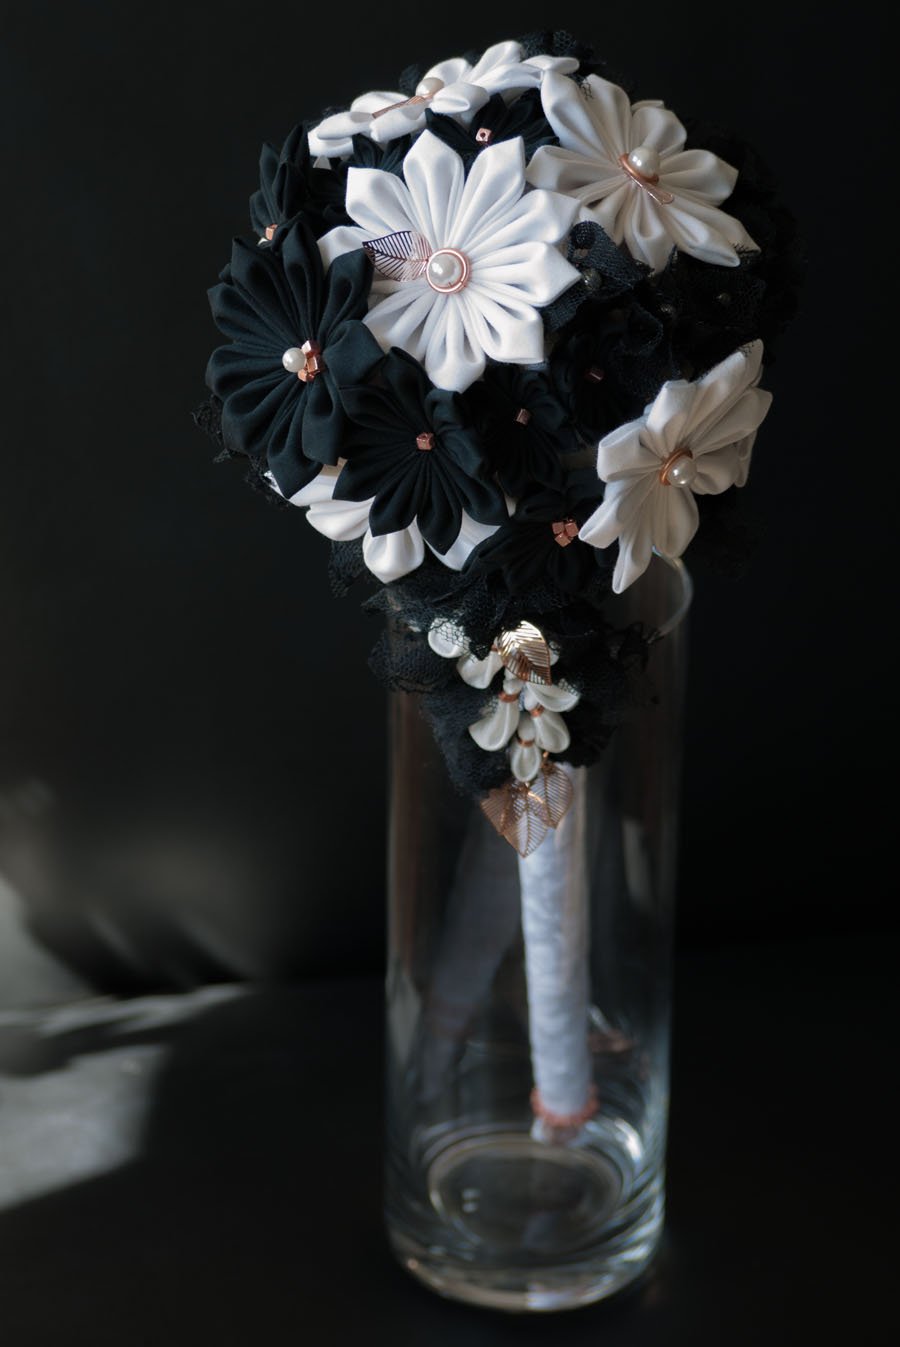 Bridal bouquet with Japanese textile flowers in black and white.